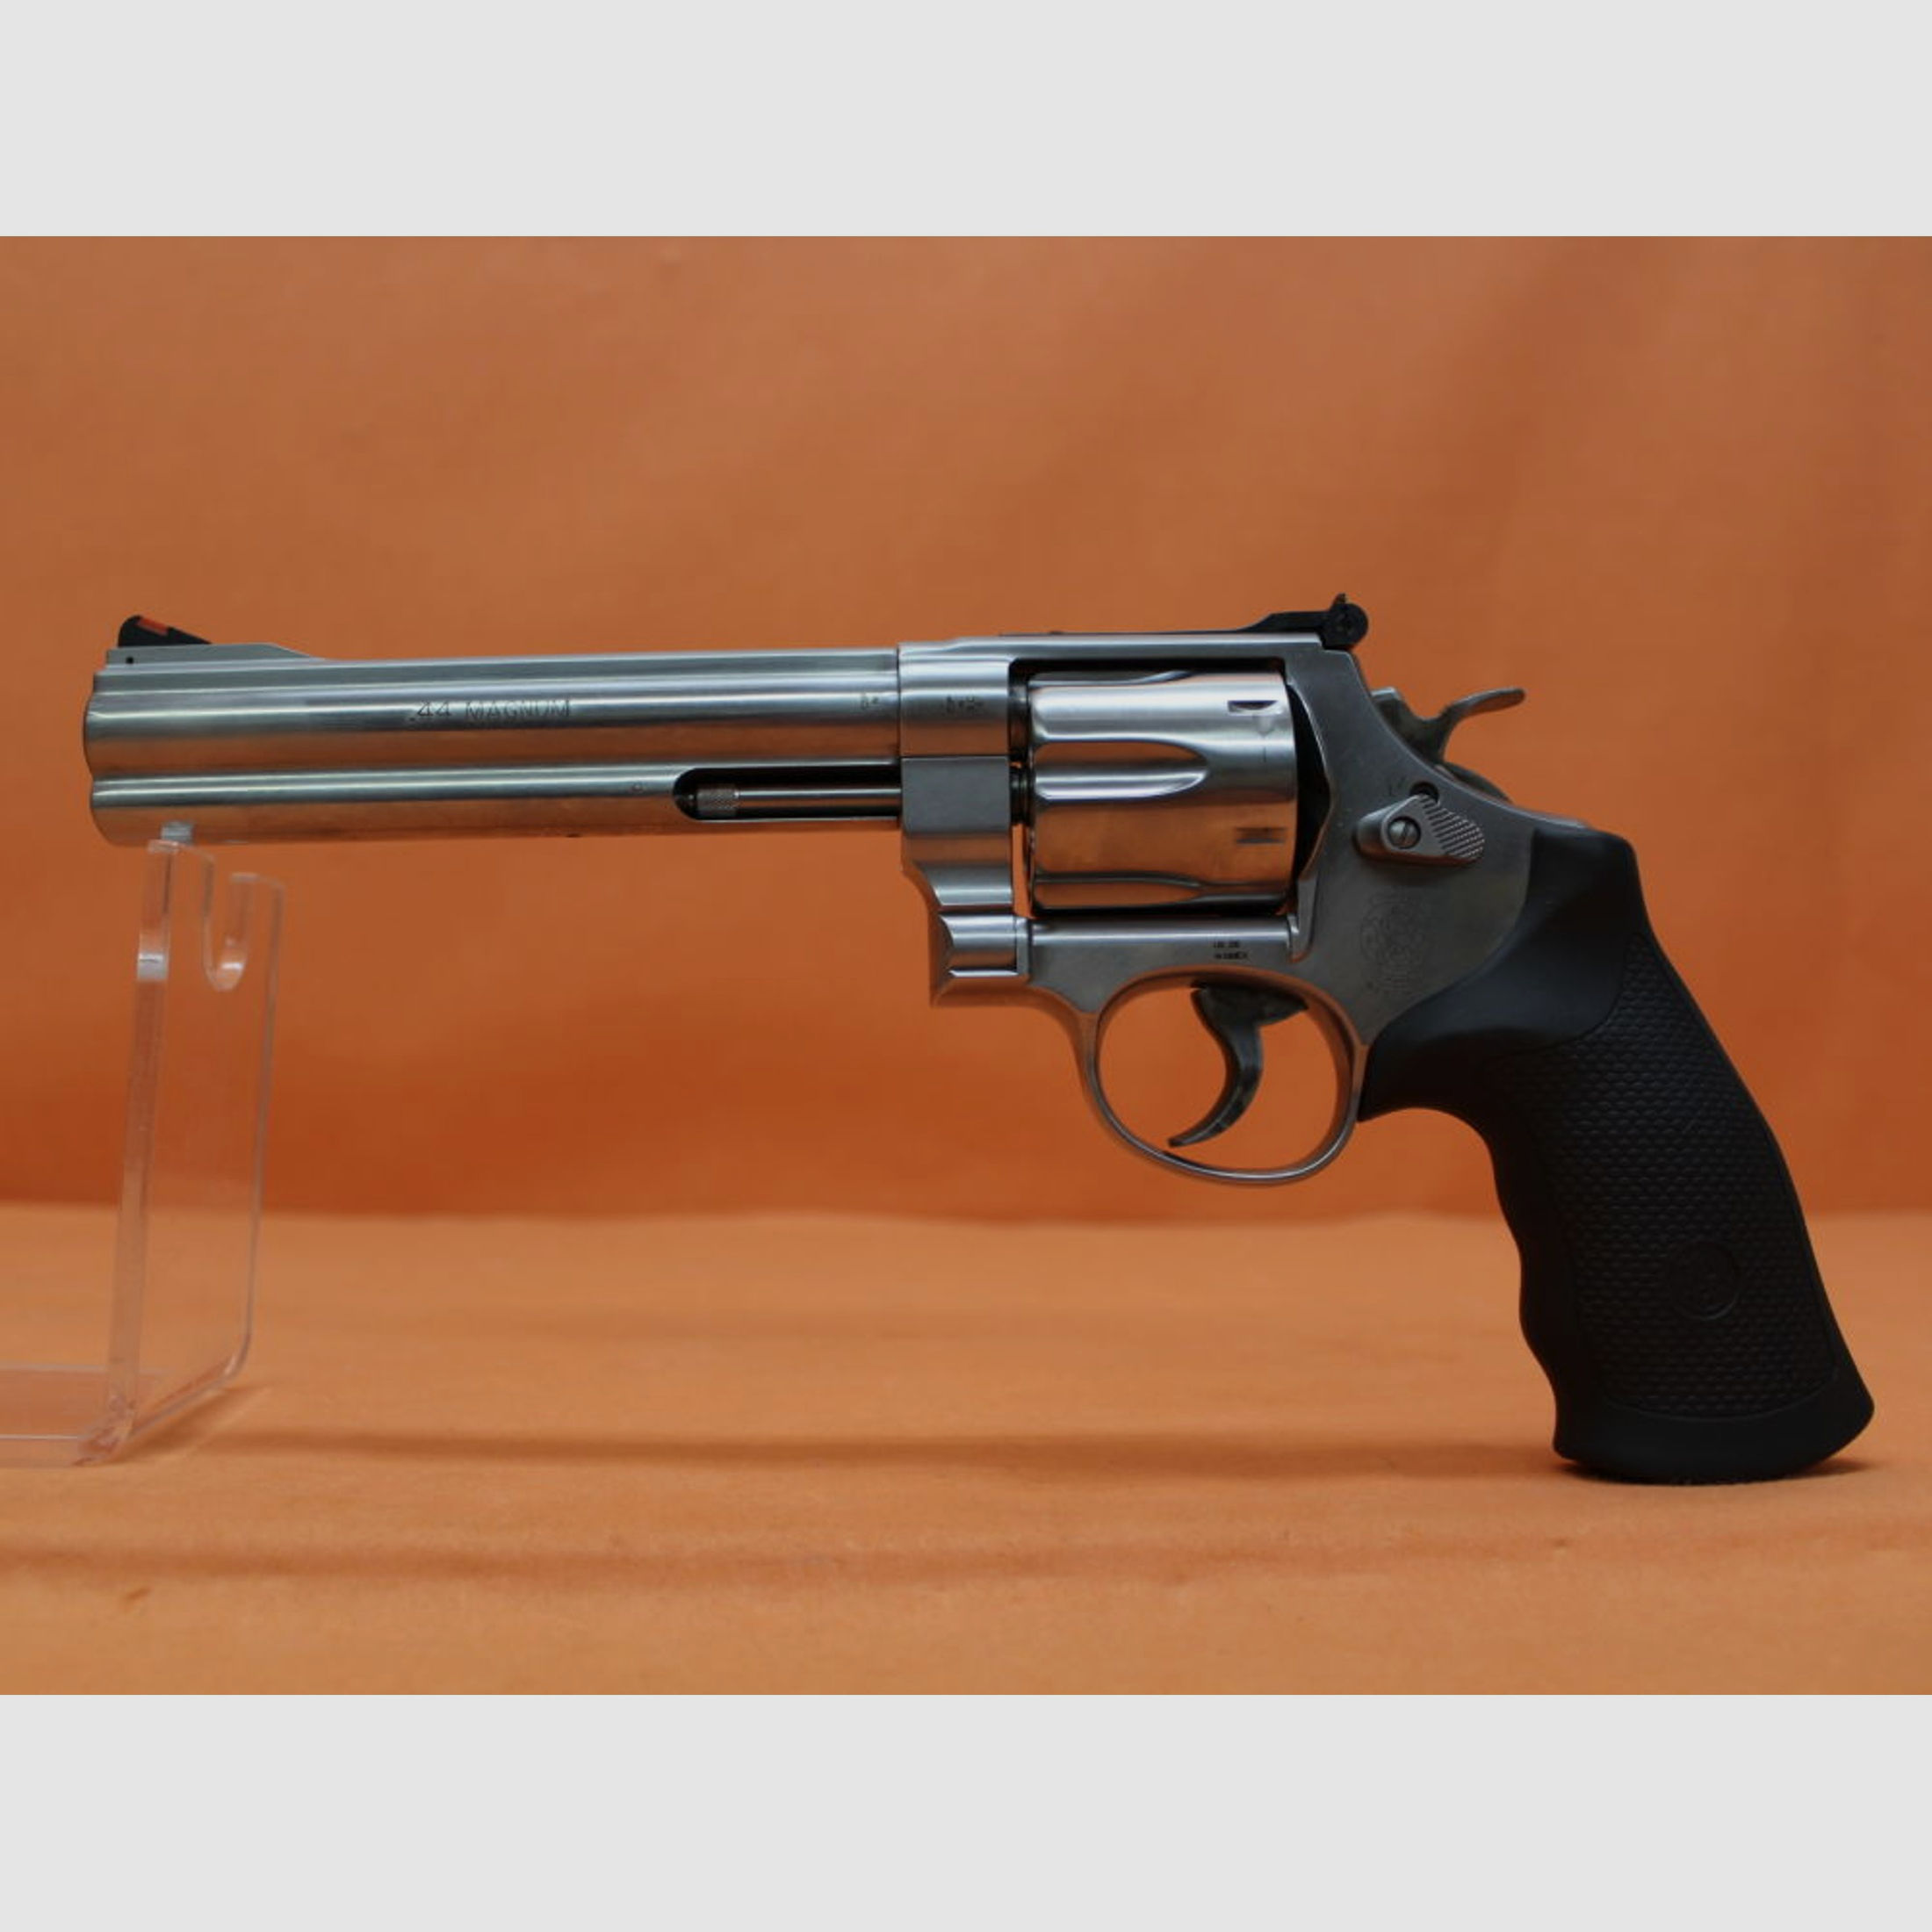 Smith&Wesson, S&W	 Revolver .44RemMagnum Smith&Wesson/ S&W629-6 Clasic Stainless 6,5" Lauf/Mikrometervisier/Gummigriff